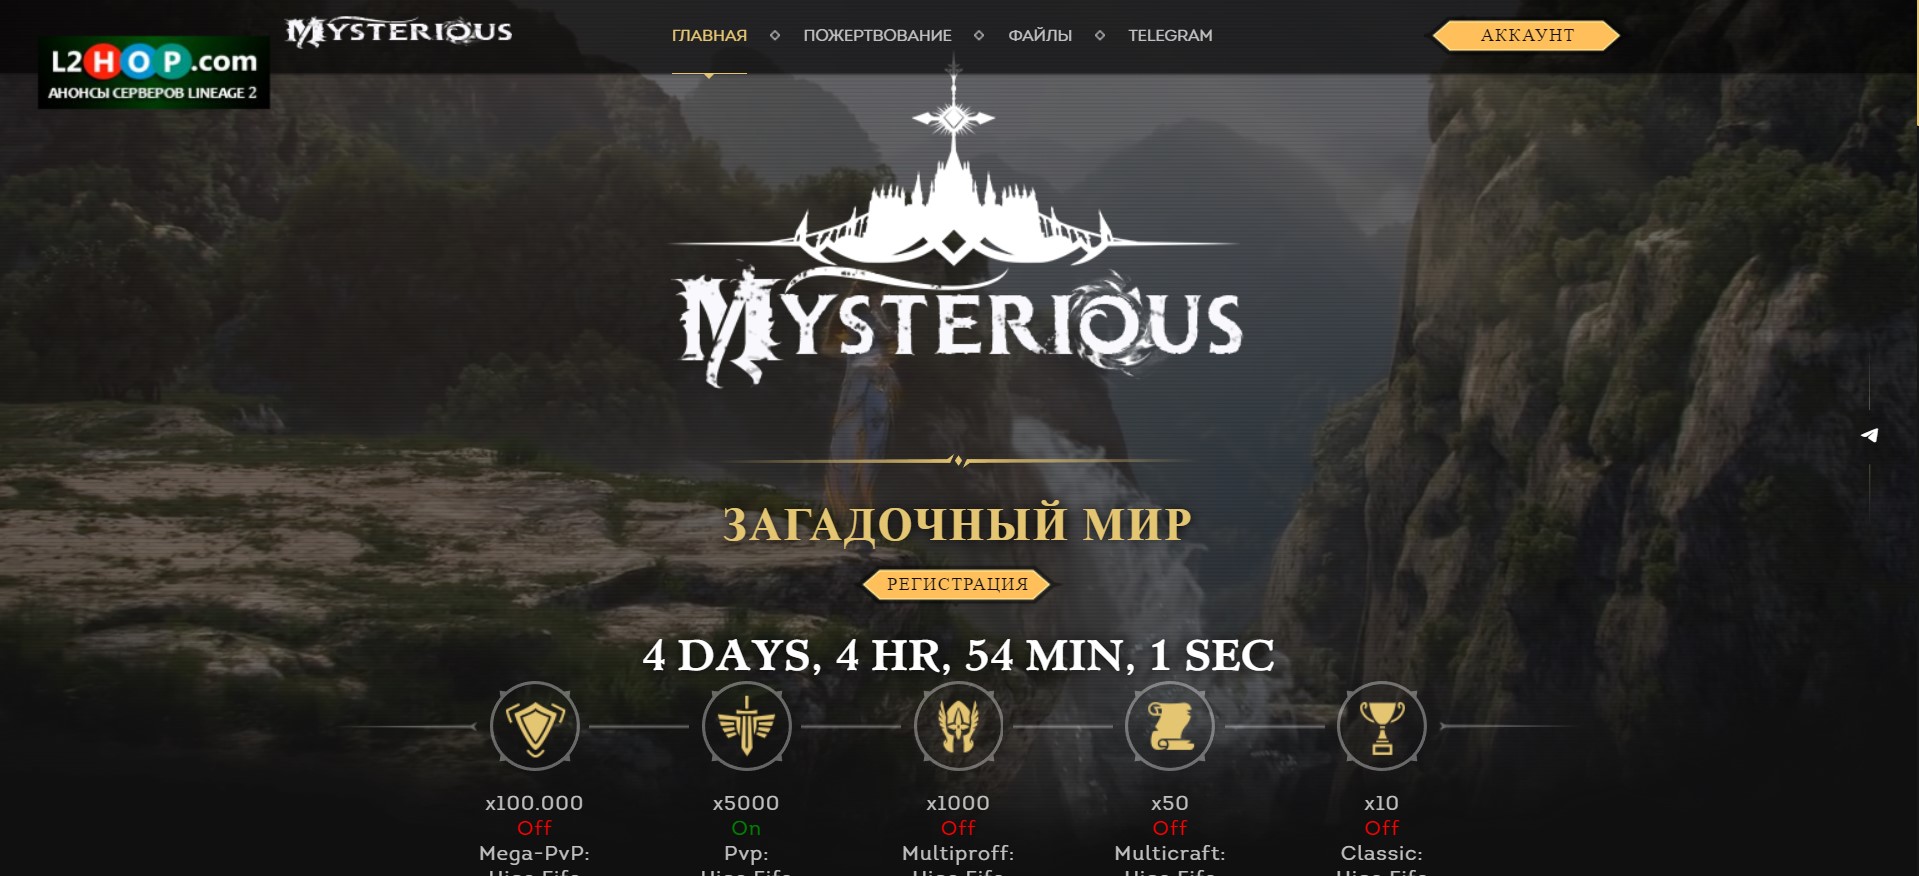 🌌 Mysterious.pw: Embrace high adventures in the world of Lineage 2 High Five with x5000 rates! Dive into the mysteries at mysterious.pw! ⚔️